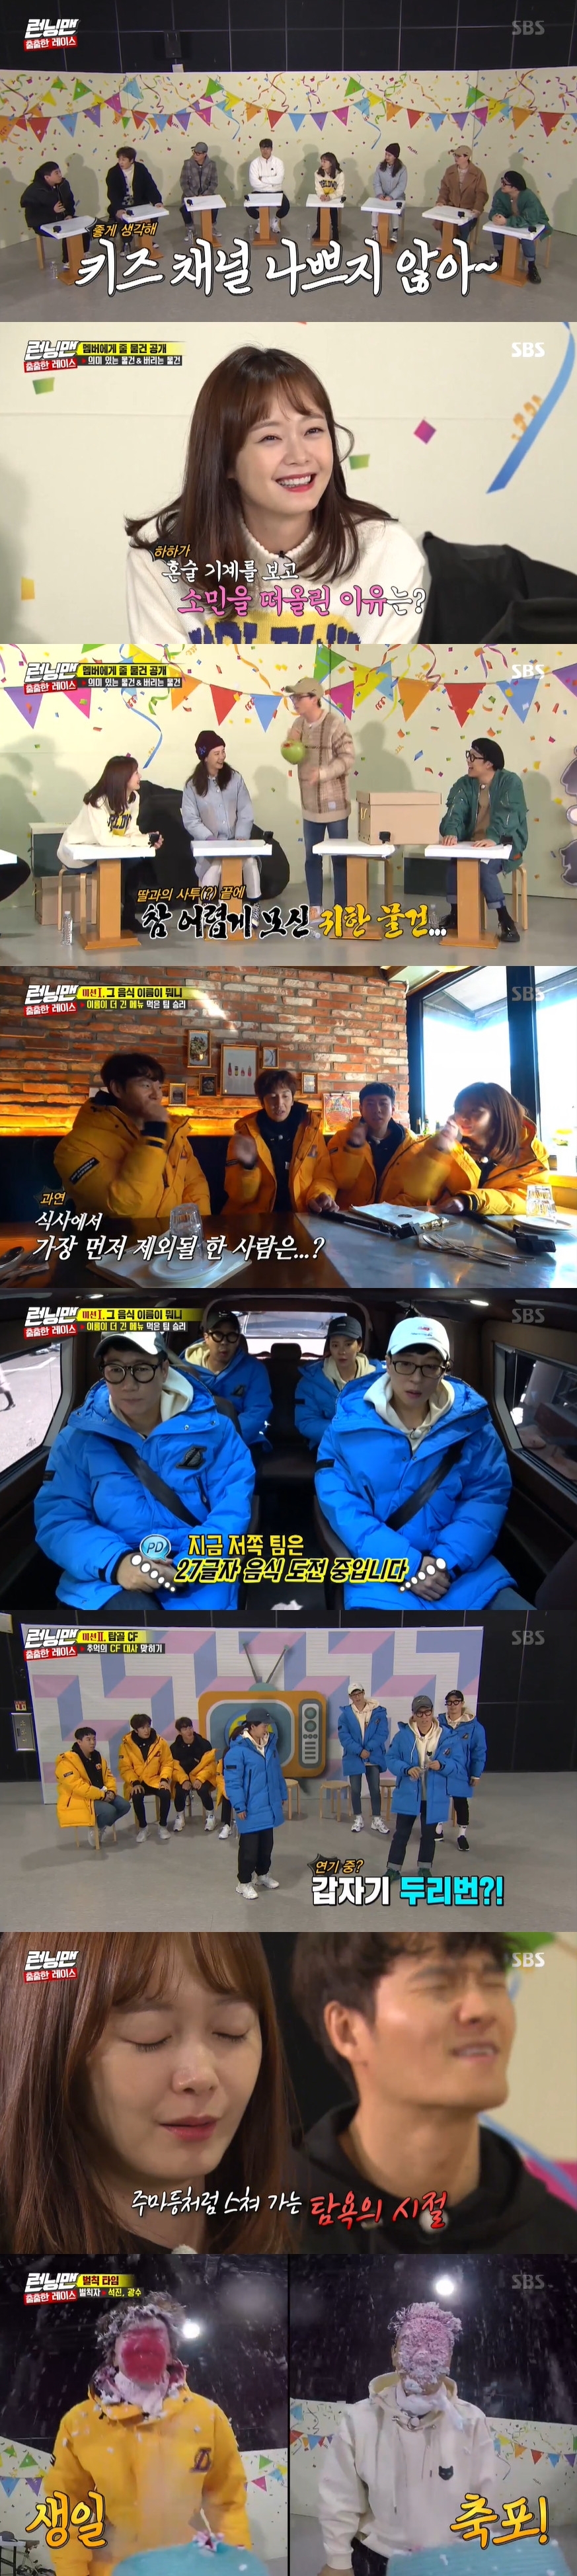 Seoul = = Ji Suk-jin and Jeon So-min team ran a race over the items they wanted to get Gift, and the Somin team won, but they did not get Gift because they were greedy.SBS Running Man, which was broadcasted at 5 pm on the 9th, was born in Ji Suk-jin and Race was held to celebrate the publication of Jeon So-min.On this day, the members have prepared each one of the Gift I want to do and Things I want to throw away.First, Haha is a meaningful thing, bringing a machine to pour alcohol for the members who are drinking, and bringing the signboard with the object that I want to throw away.Yoo Jae-Suk also introduced the comprehensive gift set of miscarriages, saying, It is so hot these days. He brought a Halloween basket as a continuation item and said, To be honest, my daughter Nana just took it away.Song Ji-hyo brought a luxury bike to Gift, but the members began to suspect that it was ex-boyfriends when they saw an oversized size.Song Ji-hyo hurriedly explained, I bought it for my brother.Gift, who throws away, pulled out an old bicycle and said, It is a bicycle I ride when I commute. In a dirty state, the members added, I throw it away.Jeon So-min released a lunch box with a heartfelt feeling, saying, Its not a thing but a gift.The members suspected that Yang Se-chan was, and Lee Kwang-soo revealed that Somin asked (Yang) Sechan what this Gift was like.Gift, who throws away, shows a T-shirt with a picture of Kim Jong Kook and says, It seems like there are too two at home, and I feel like looking at me everywhere.Ji Suk-jin said he had been to a department store with his wife for meaningful Gift and pulled out a hip mulch for Lee Kwang-soo.He also brought the navigation that can only be used in United States of America to Gift to throw away.Lee Kwang-soo showed a 1 million won large-capacity mixer to admire everyone.The Gift, which is followed by a 300-sized Ug Boot and a ghost house that Haha received from Haha nine years ago, laughed.Yang Se-chan brought a meaningful Gift to the carbonated water machine, a Gift that dumps sound-deficient speakers.The speaker was criticized for being given by Lee Kwang-soo.The birth of Ji Suk-jin and the publication of Jeon So-min, Haha, Race was followed.The team that won the team divided into the Seokjin team and the Somin team was a meaningful Gift or 100-inch TV Choices to the Bokbulbok Show.First, the team that ate a longer menu went on a mission to win, and Ji Suk-jin went to find a 22-letter menu, and the Jeon So-min team went to find an 18-letter menu.The Ji Suk-jin team tricked over the Jeon So-min team, which Haha hastily created a 45-letter menu for his restaurant.However, considering the equity, the team did not recognize the 47 letters, so the team won one victory.The second mission was to meet the CF ambassador of memories, to meet the CF of the top goal, and the Somin team won the final advertisement in the 2-2 situation.Jeon So-min decided to take 100-inch TV instead of Gift, Choices during the Bokbulbok Show but kickedEventually, he took a useless Gift and Jeon So-min picked out United States of America navigation.Turns out, there was no TV and the more greed the team leader got, the less he could have Gift.The team members knew this and the members said, I did not think I would listen to us because my eyes were bright.Lee Kwang-soo and Ji Suk-jin, who had no badges, won the penalty.Meanwhile, Running Man is broadcast every Sunday at 5 pm.